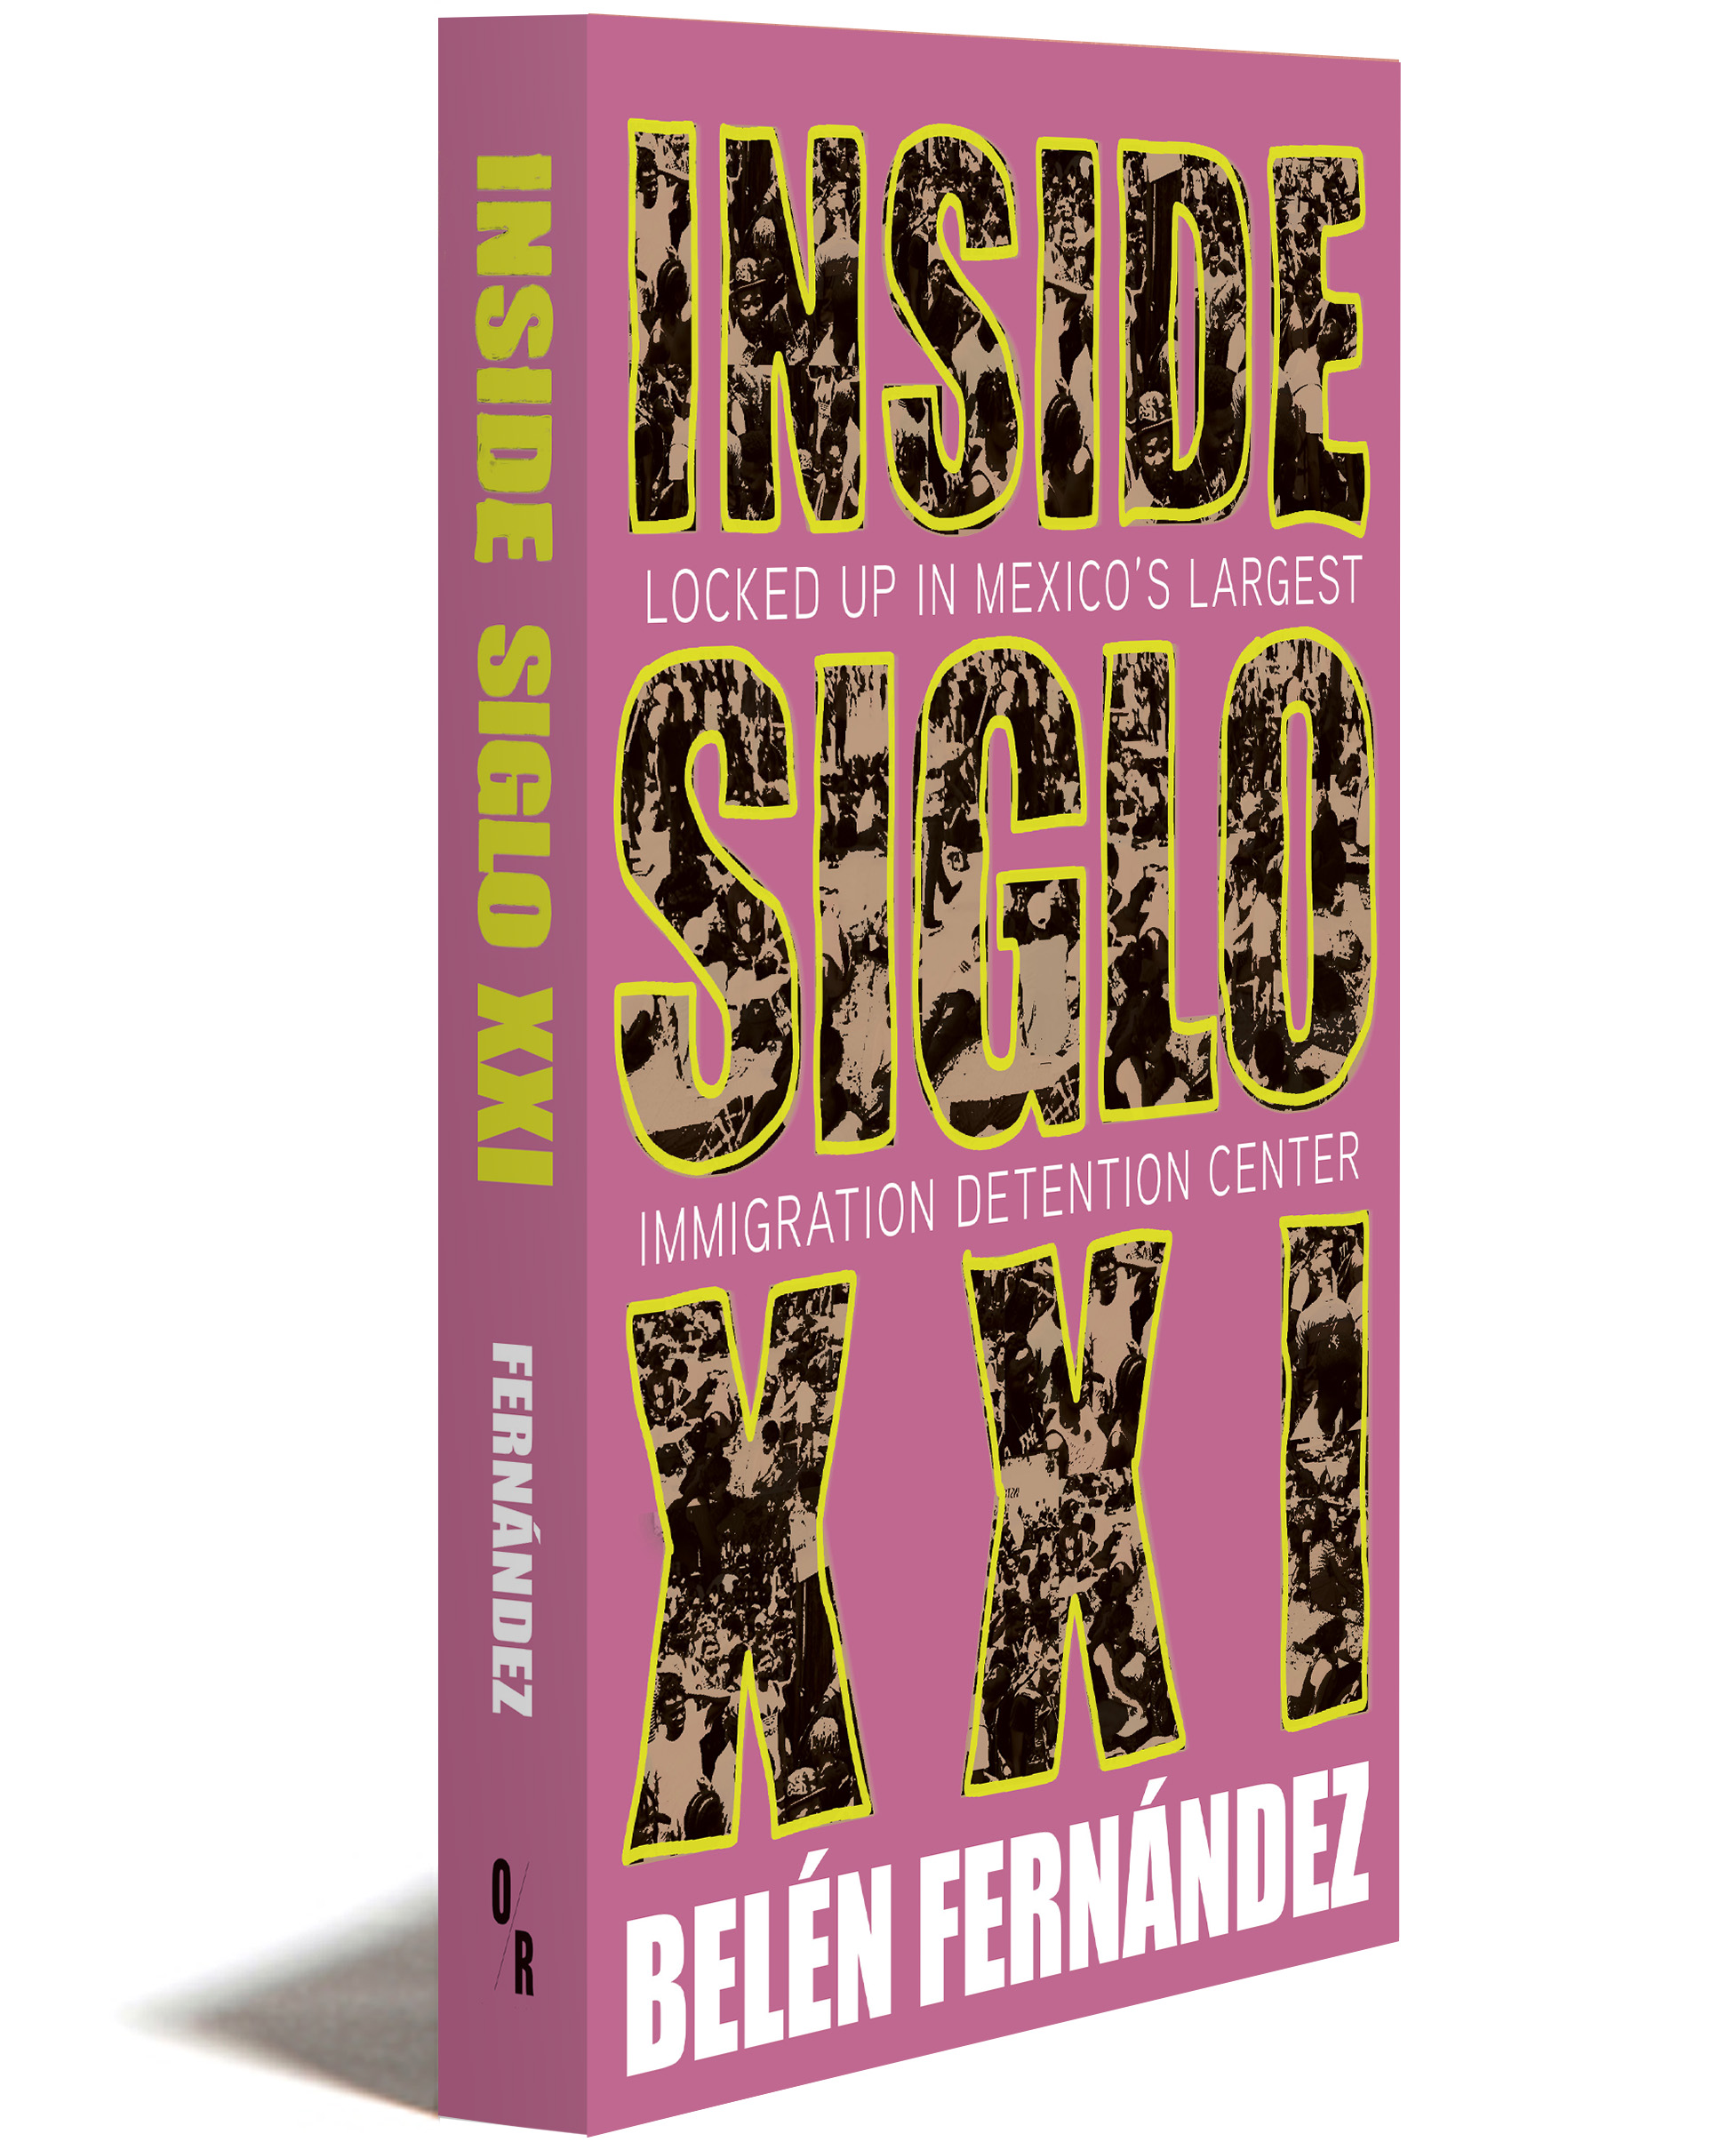  inside siglo xxi 3D cover